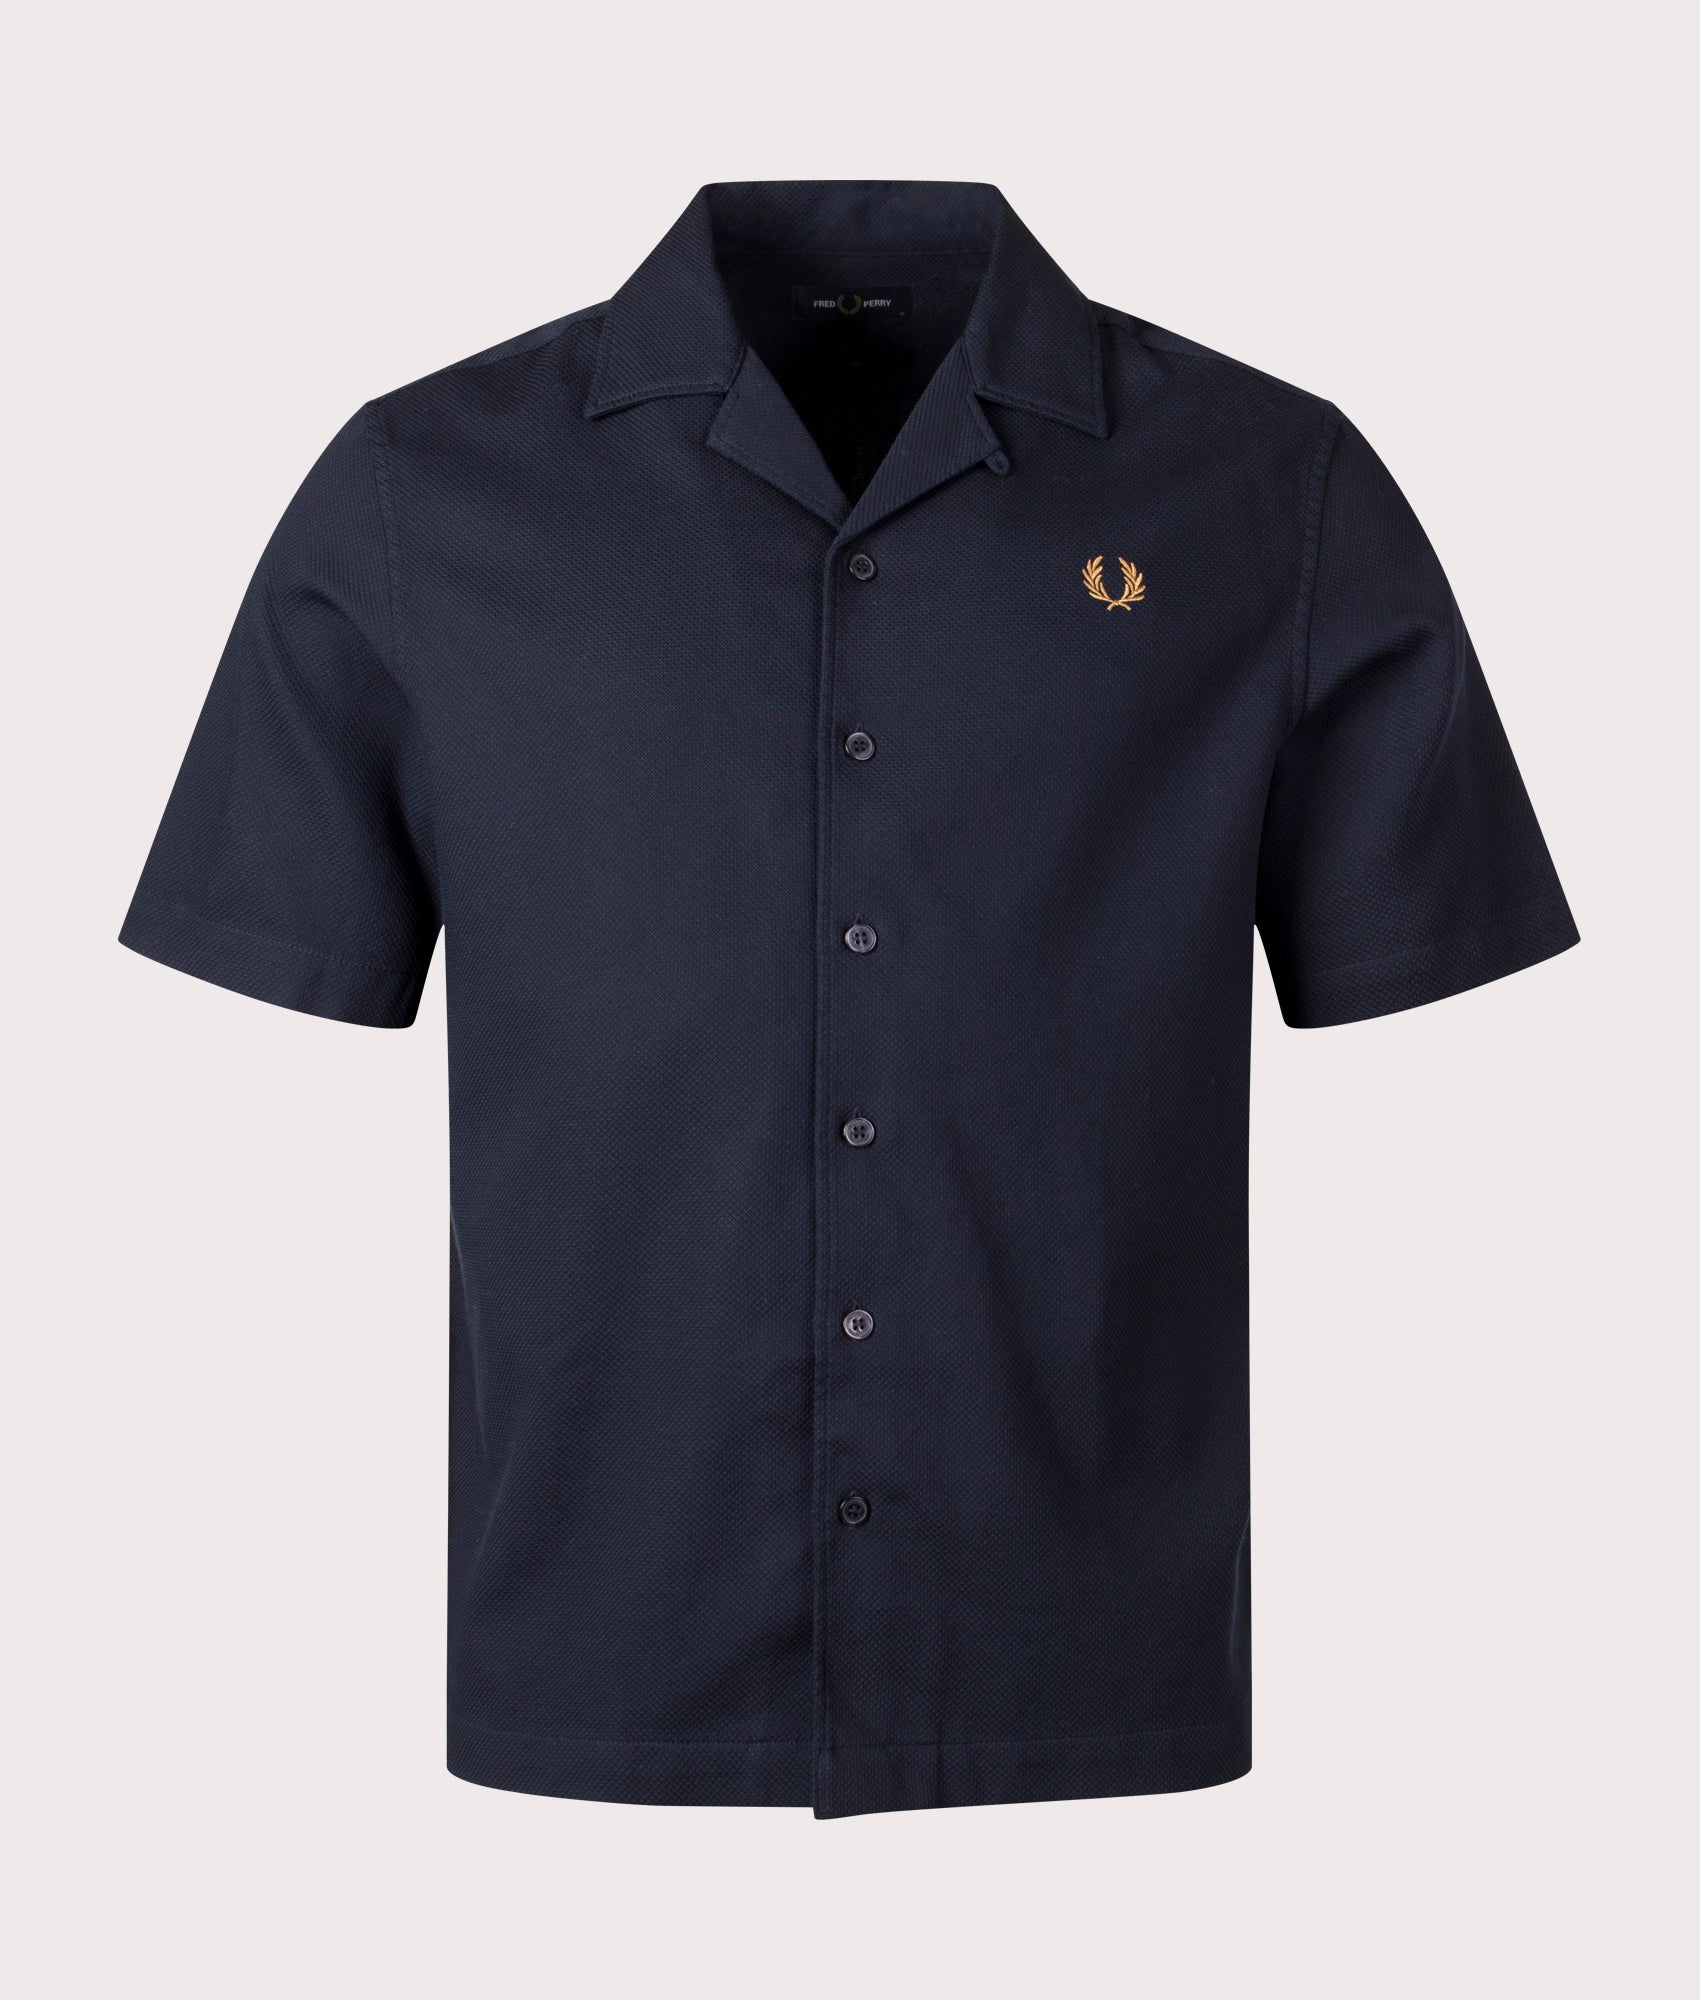 Fred Perry Mens Pique Texture Revere Collar Shirt - Colour: 608 Navy - Size: XL